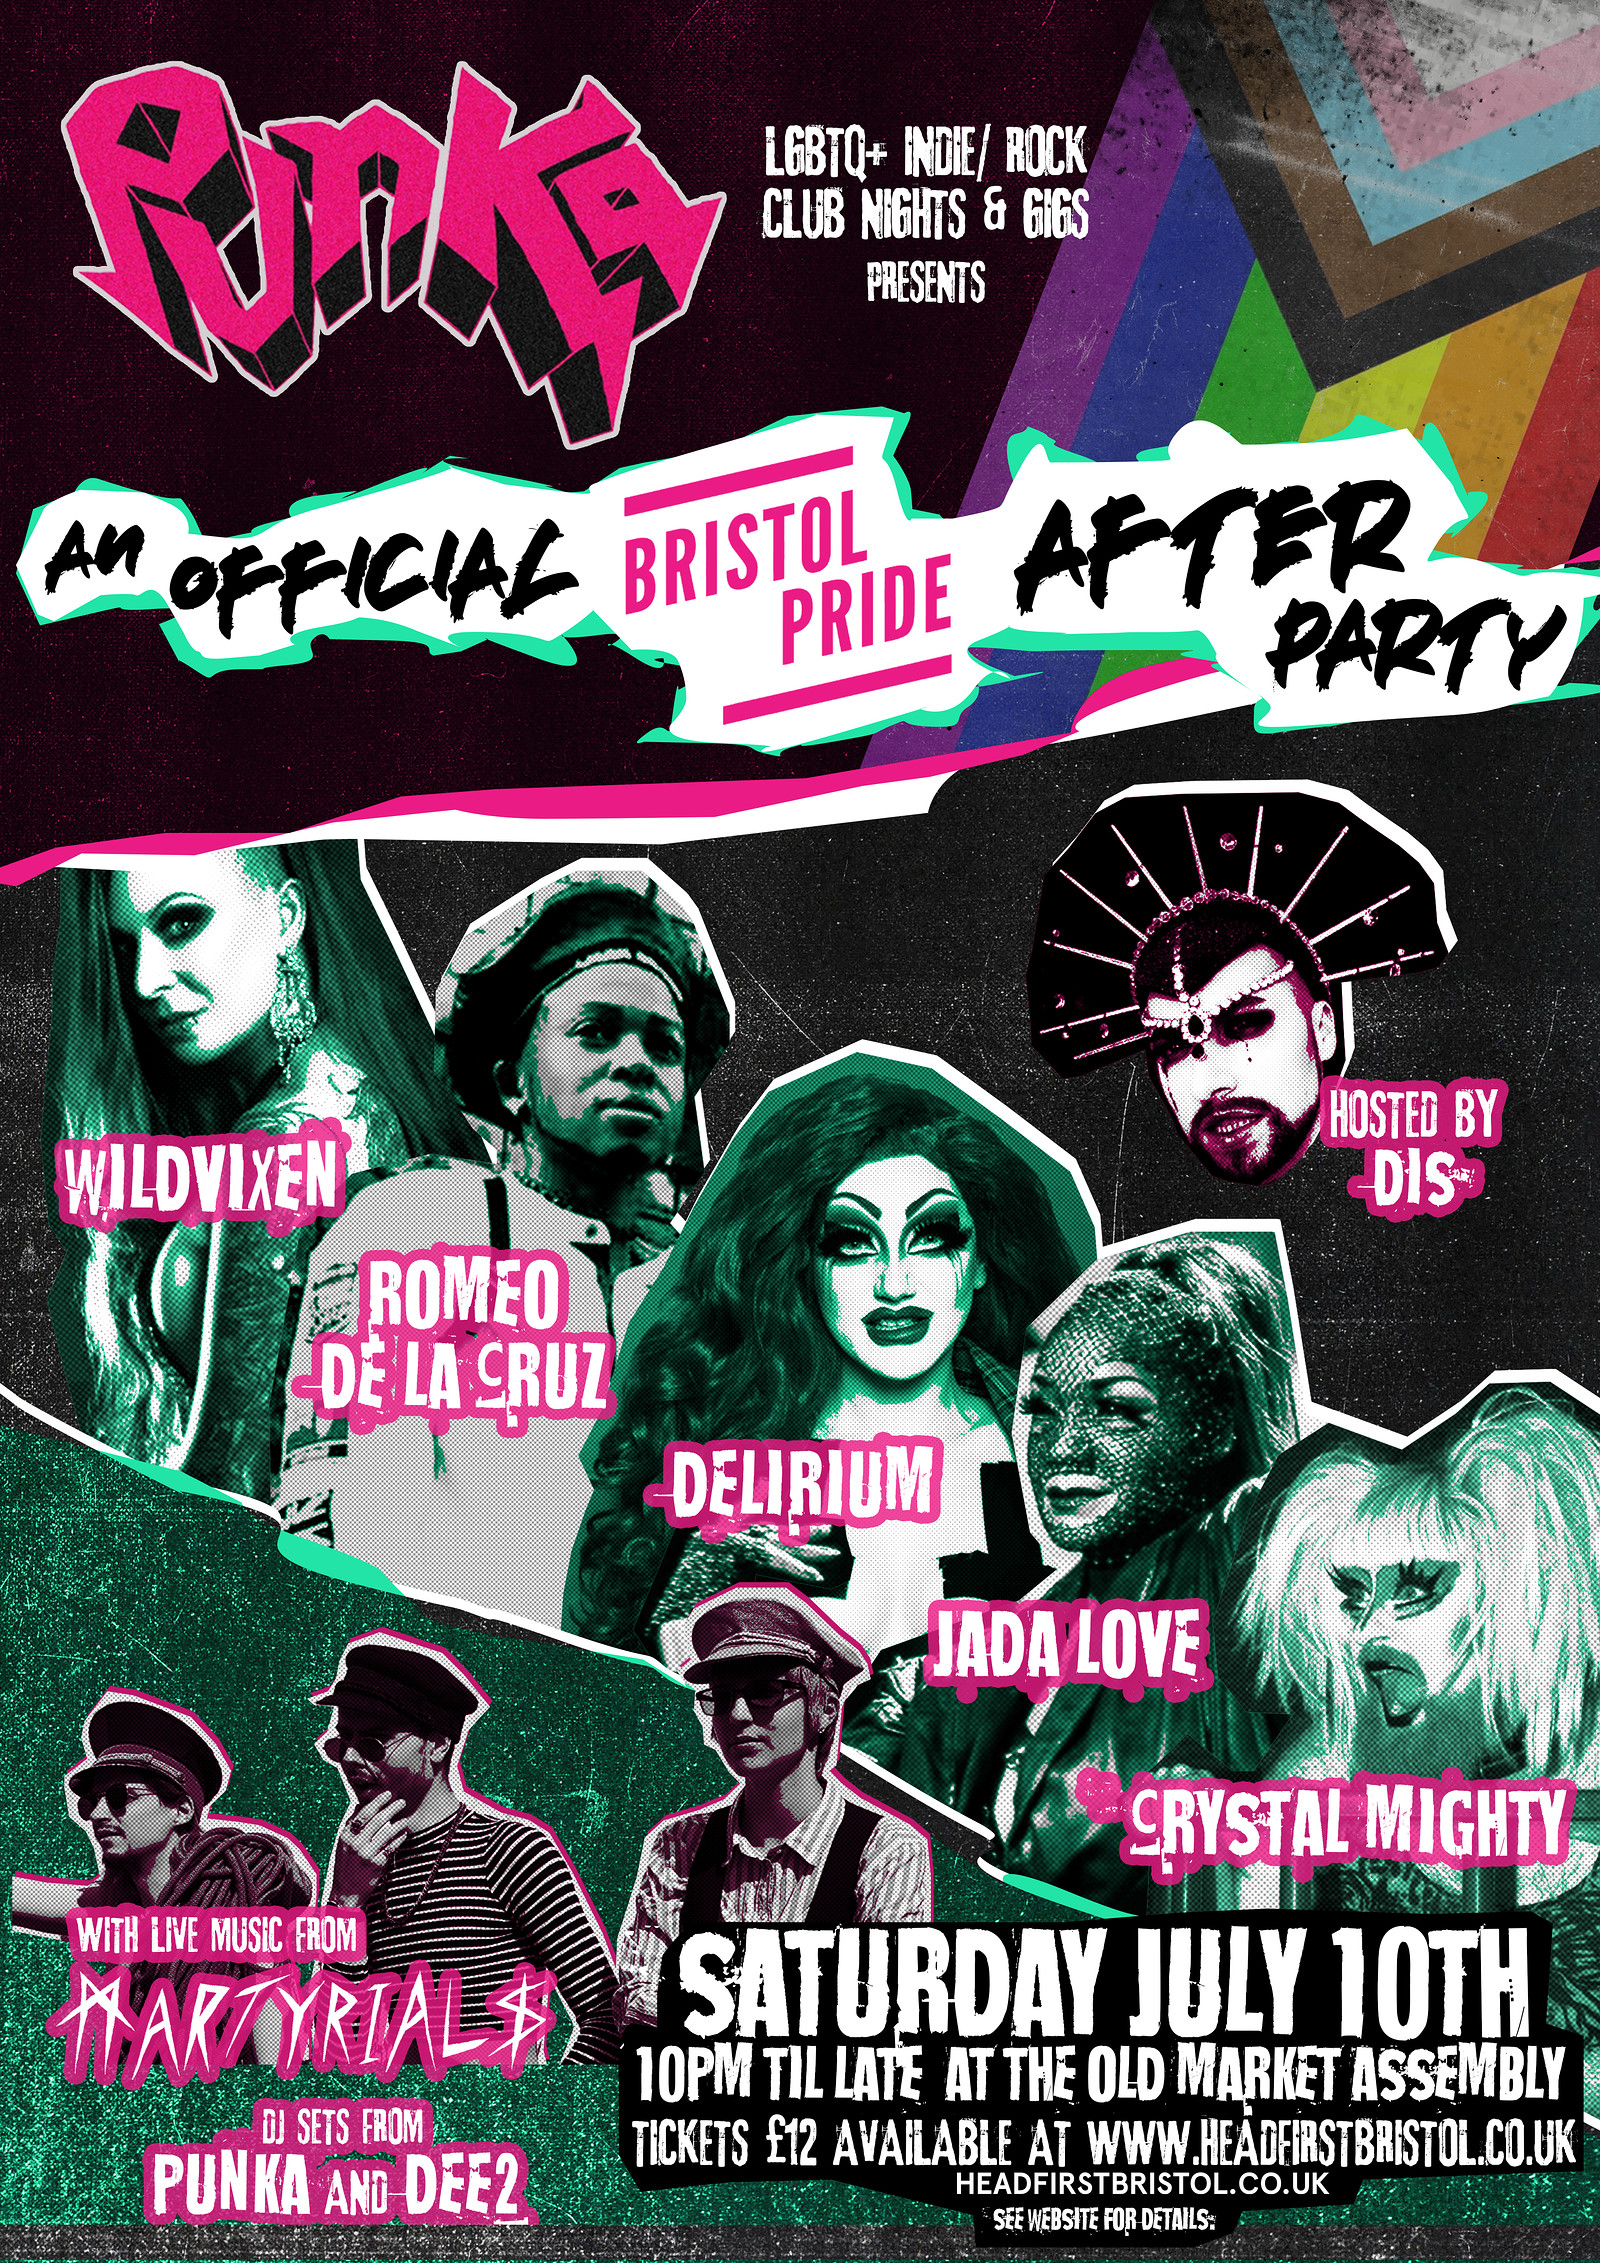 An Official Bristol Pride After Party at The Old Market Assembly